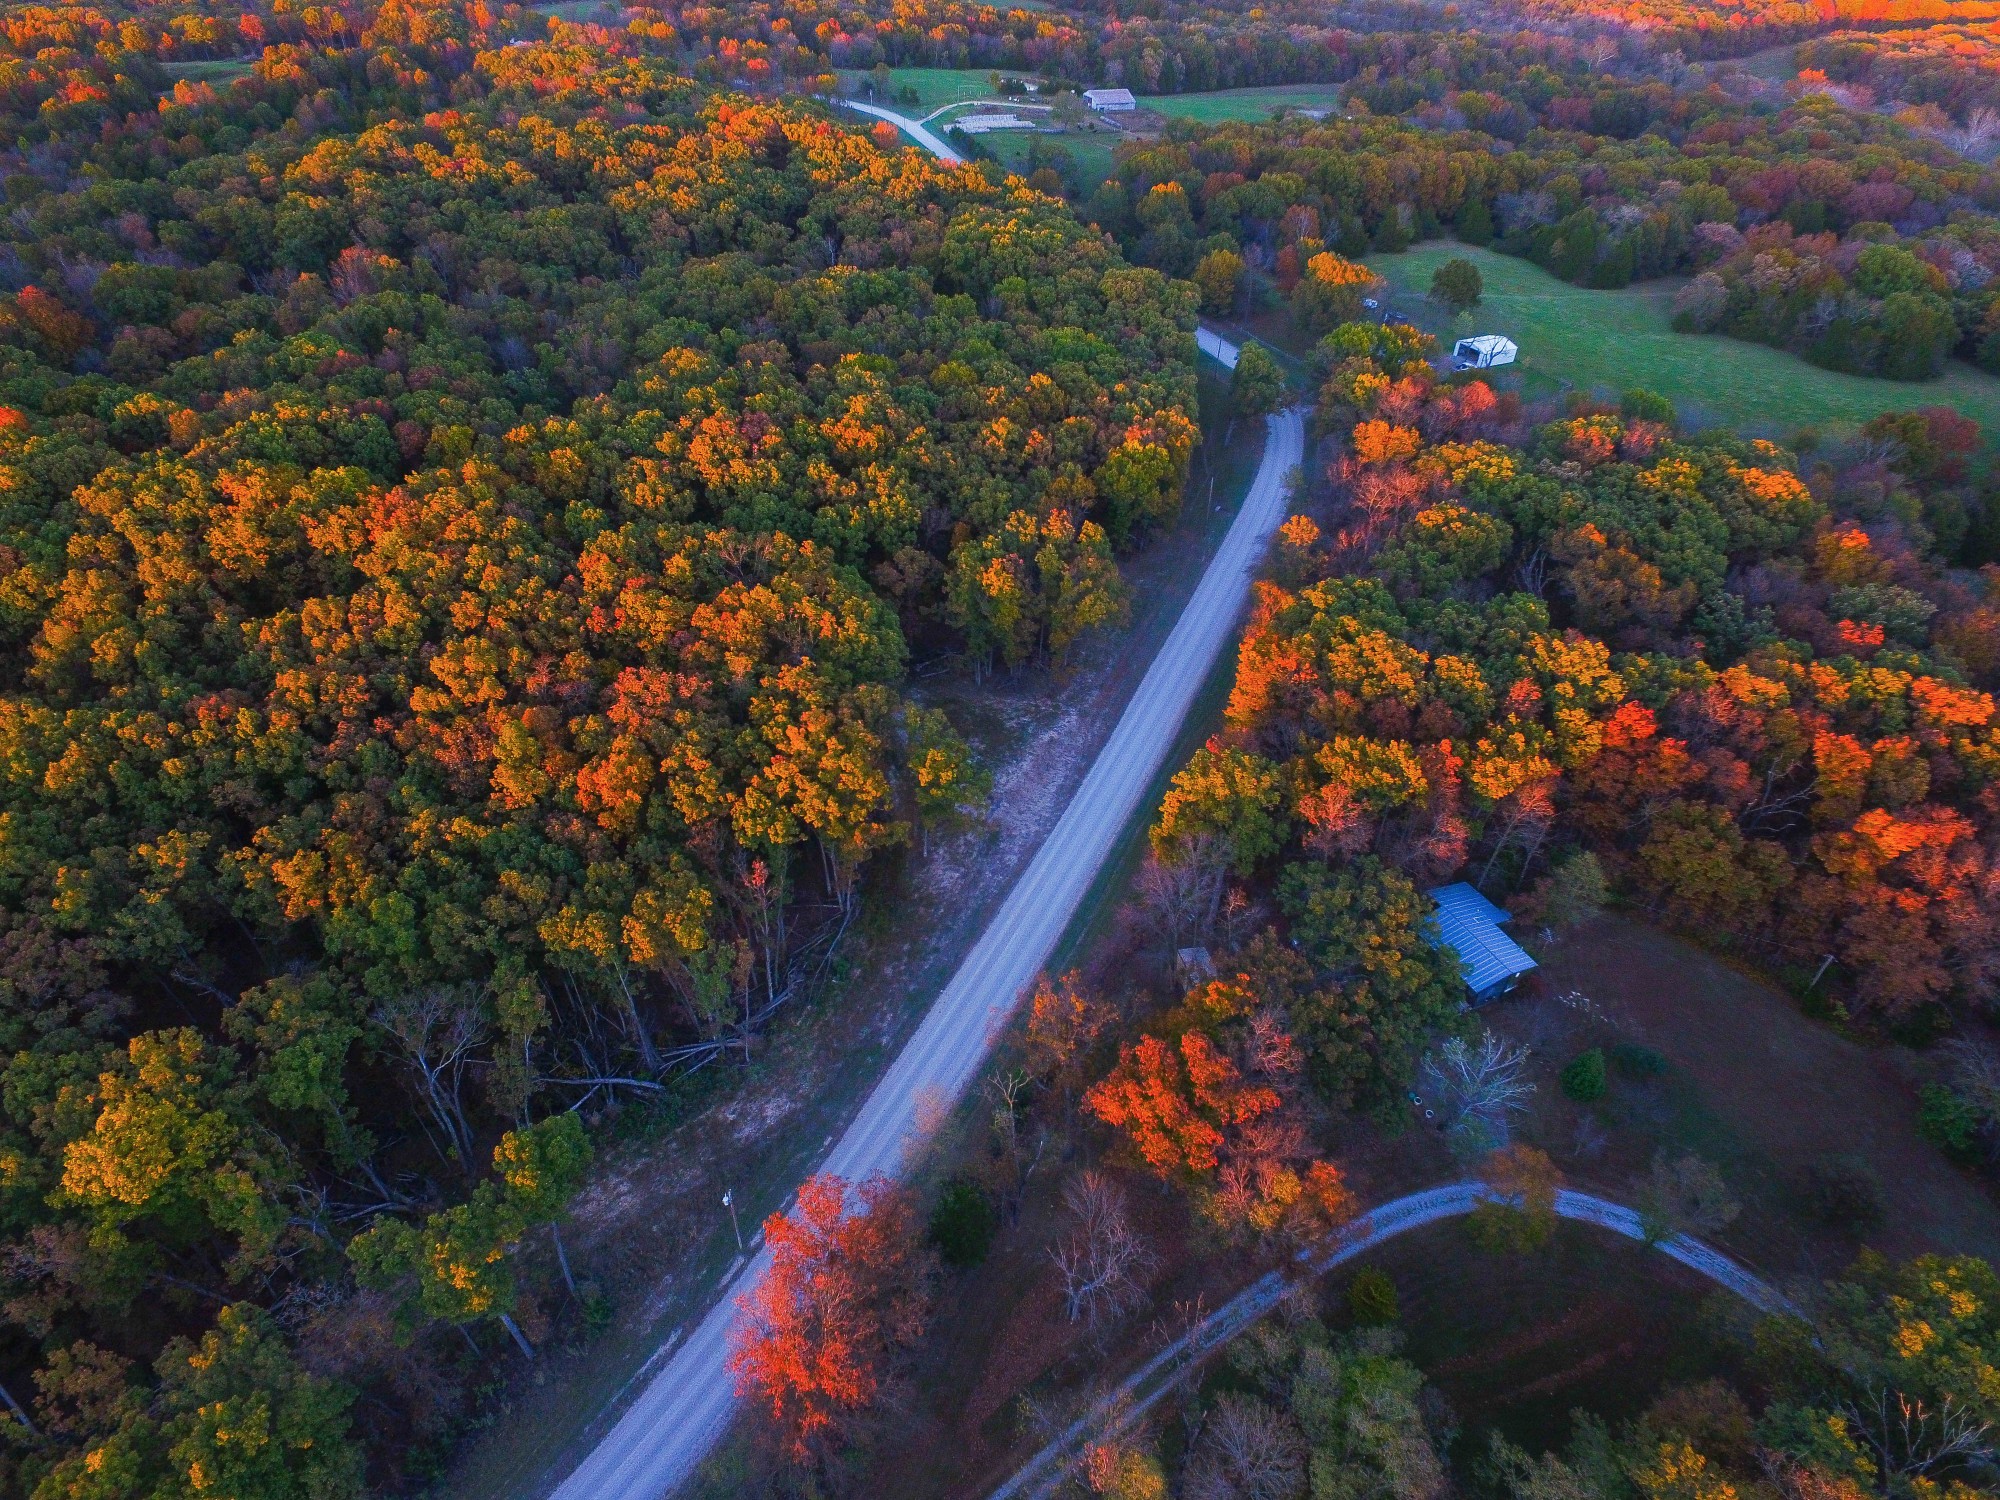 Fall Weekend at the farm autumn leaves and trees DJI Phantom 3 advanced video and Outfit of the day! By lauren lindmark on dailydoseofcharm.com lauren lindmark